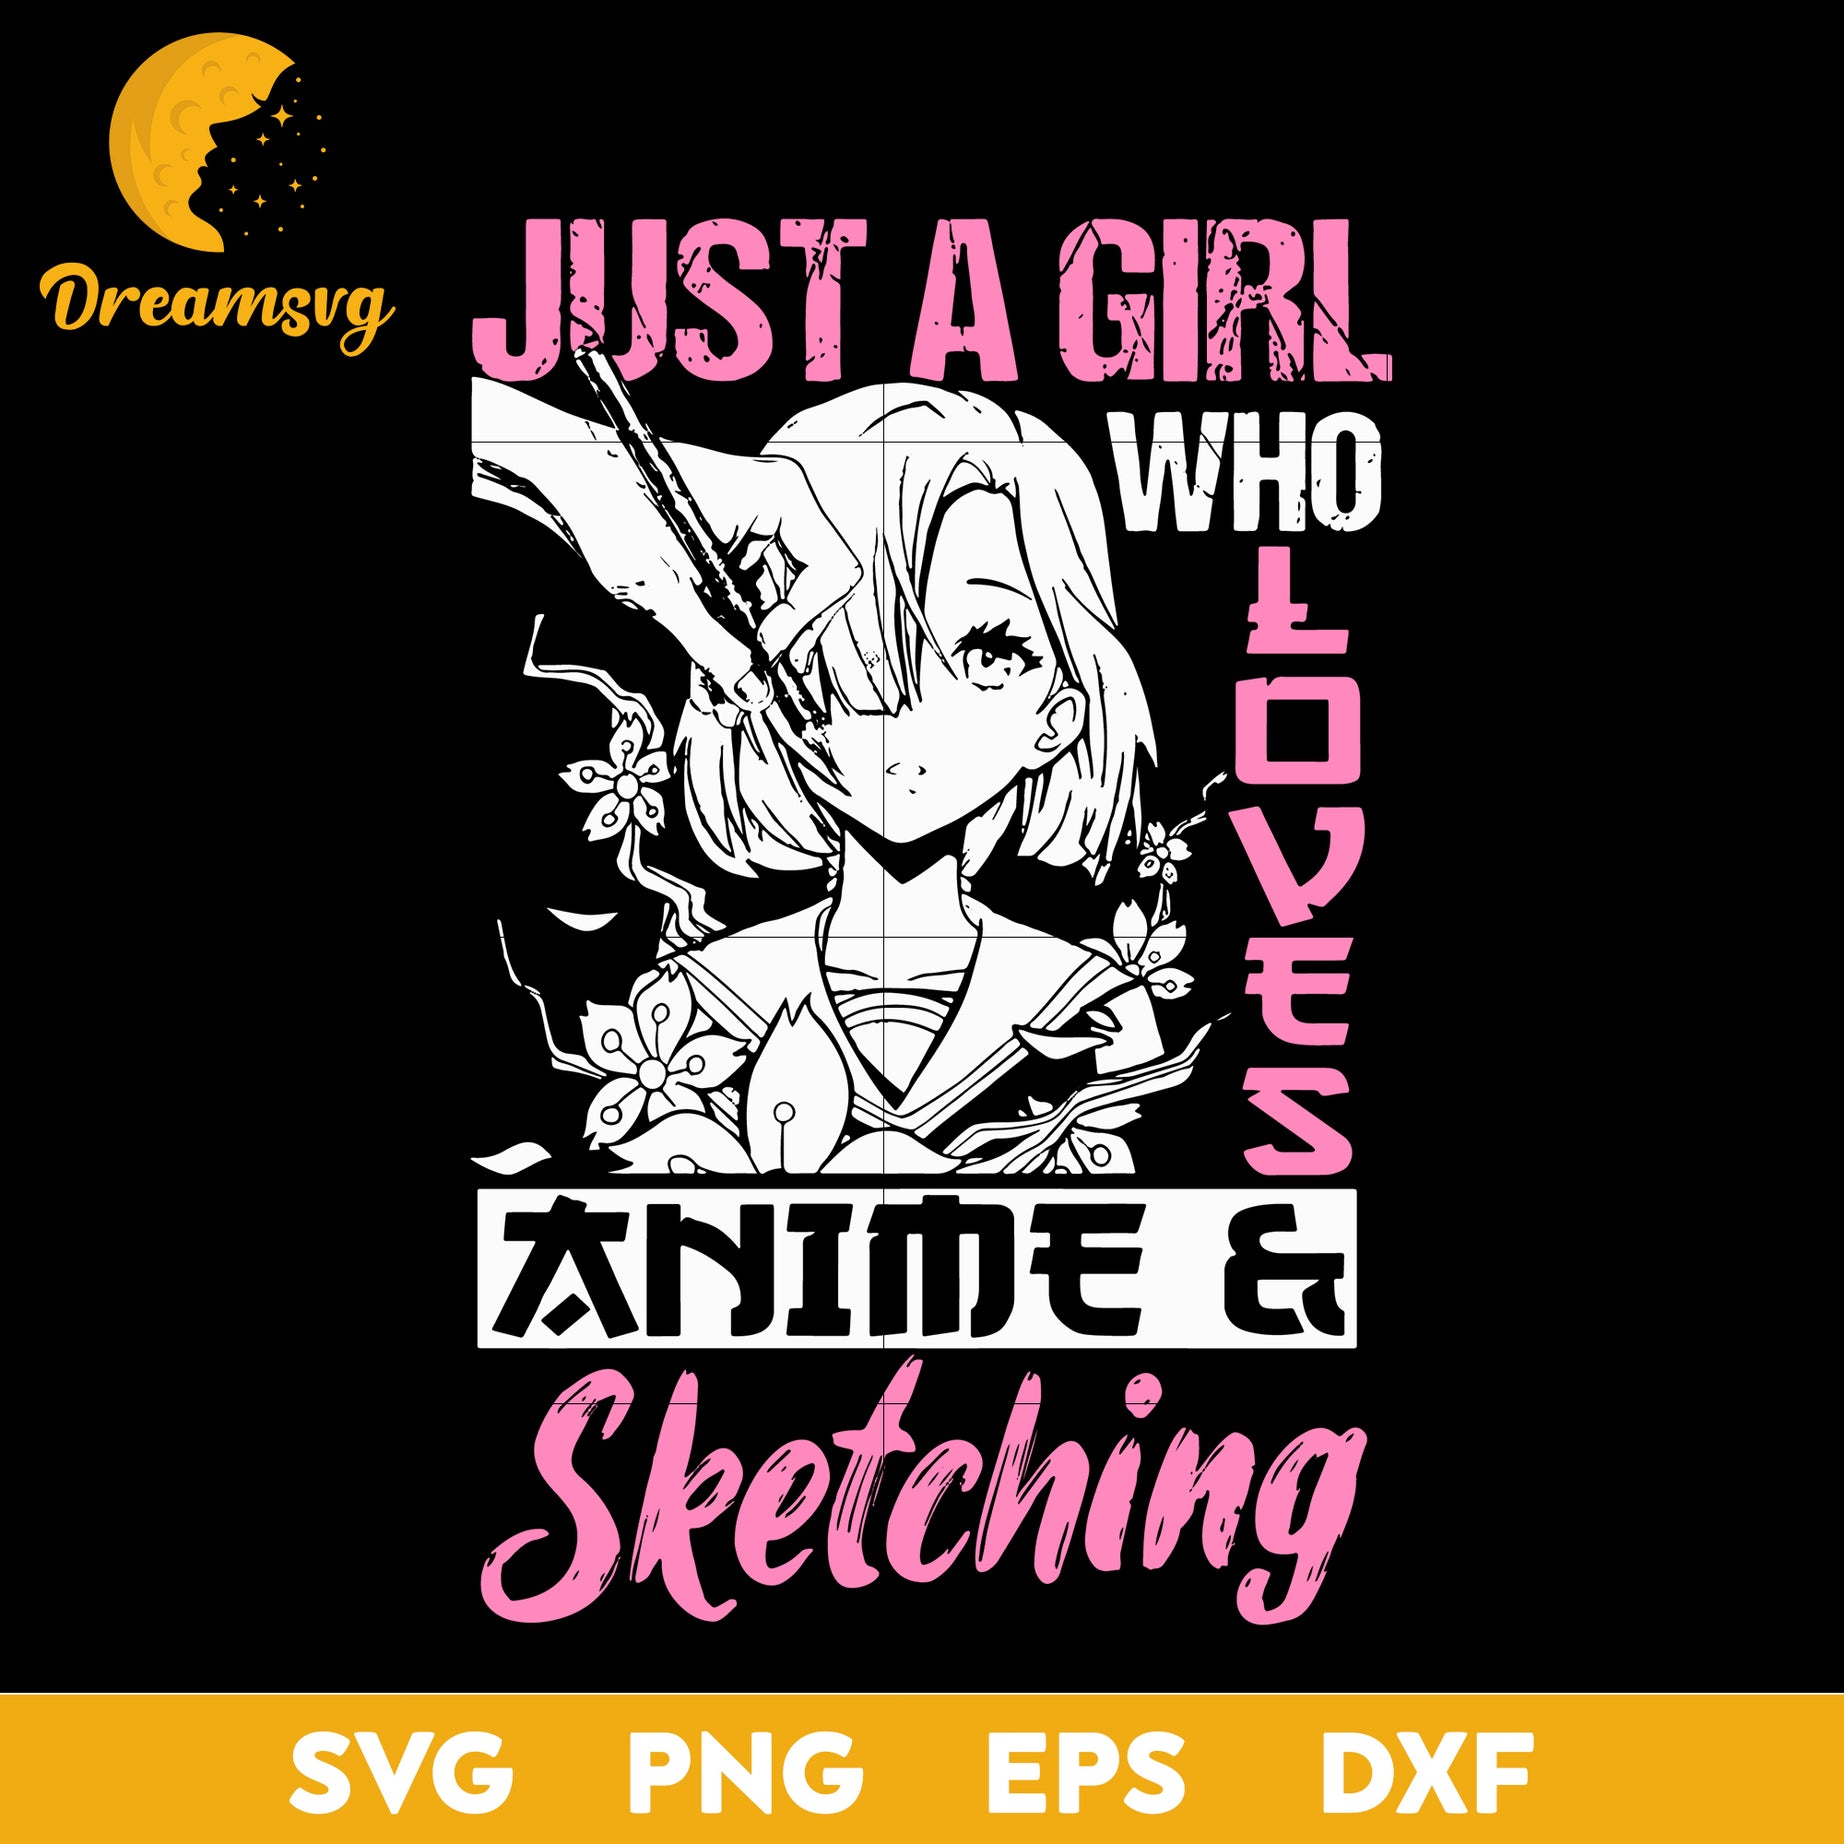 Otaku Just A Girl Who Loves Anime, And Sketching Manga Girl Svg Anime, Lovers Svg Manga Svg Anime, Girl Svg Anime Svg, png, eps, dxf digital download.